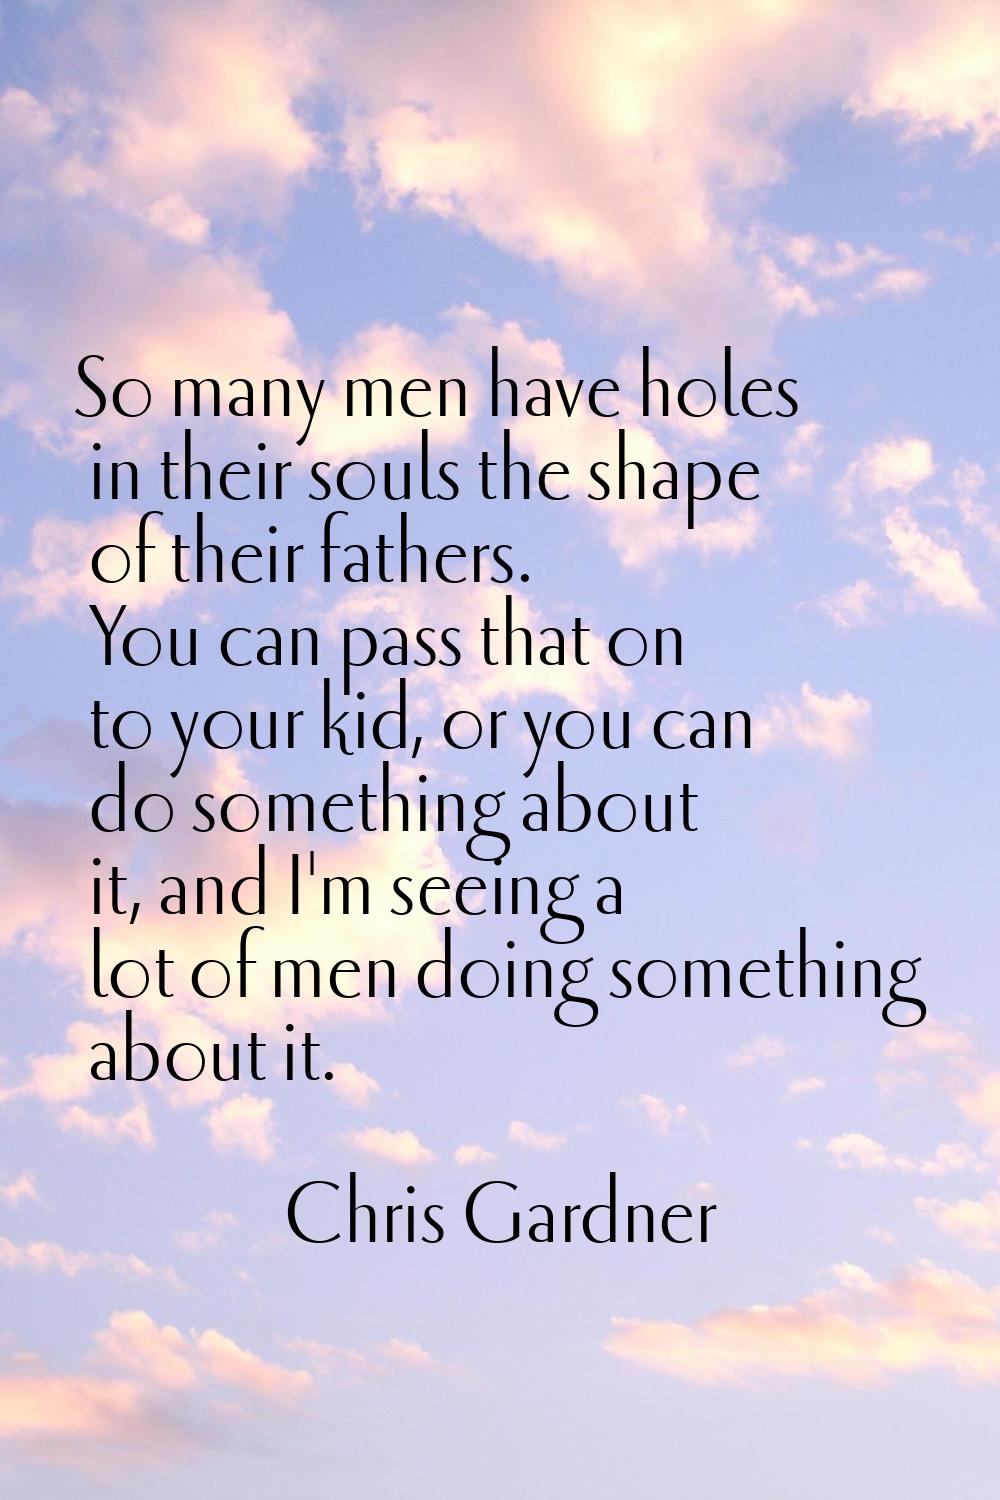 So many men have holes in their souls the shape of their fathers. You can pass that on to your kid,